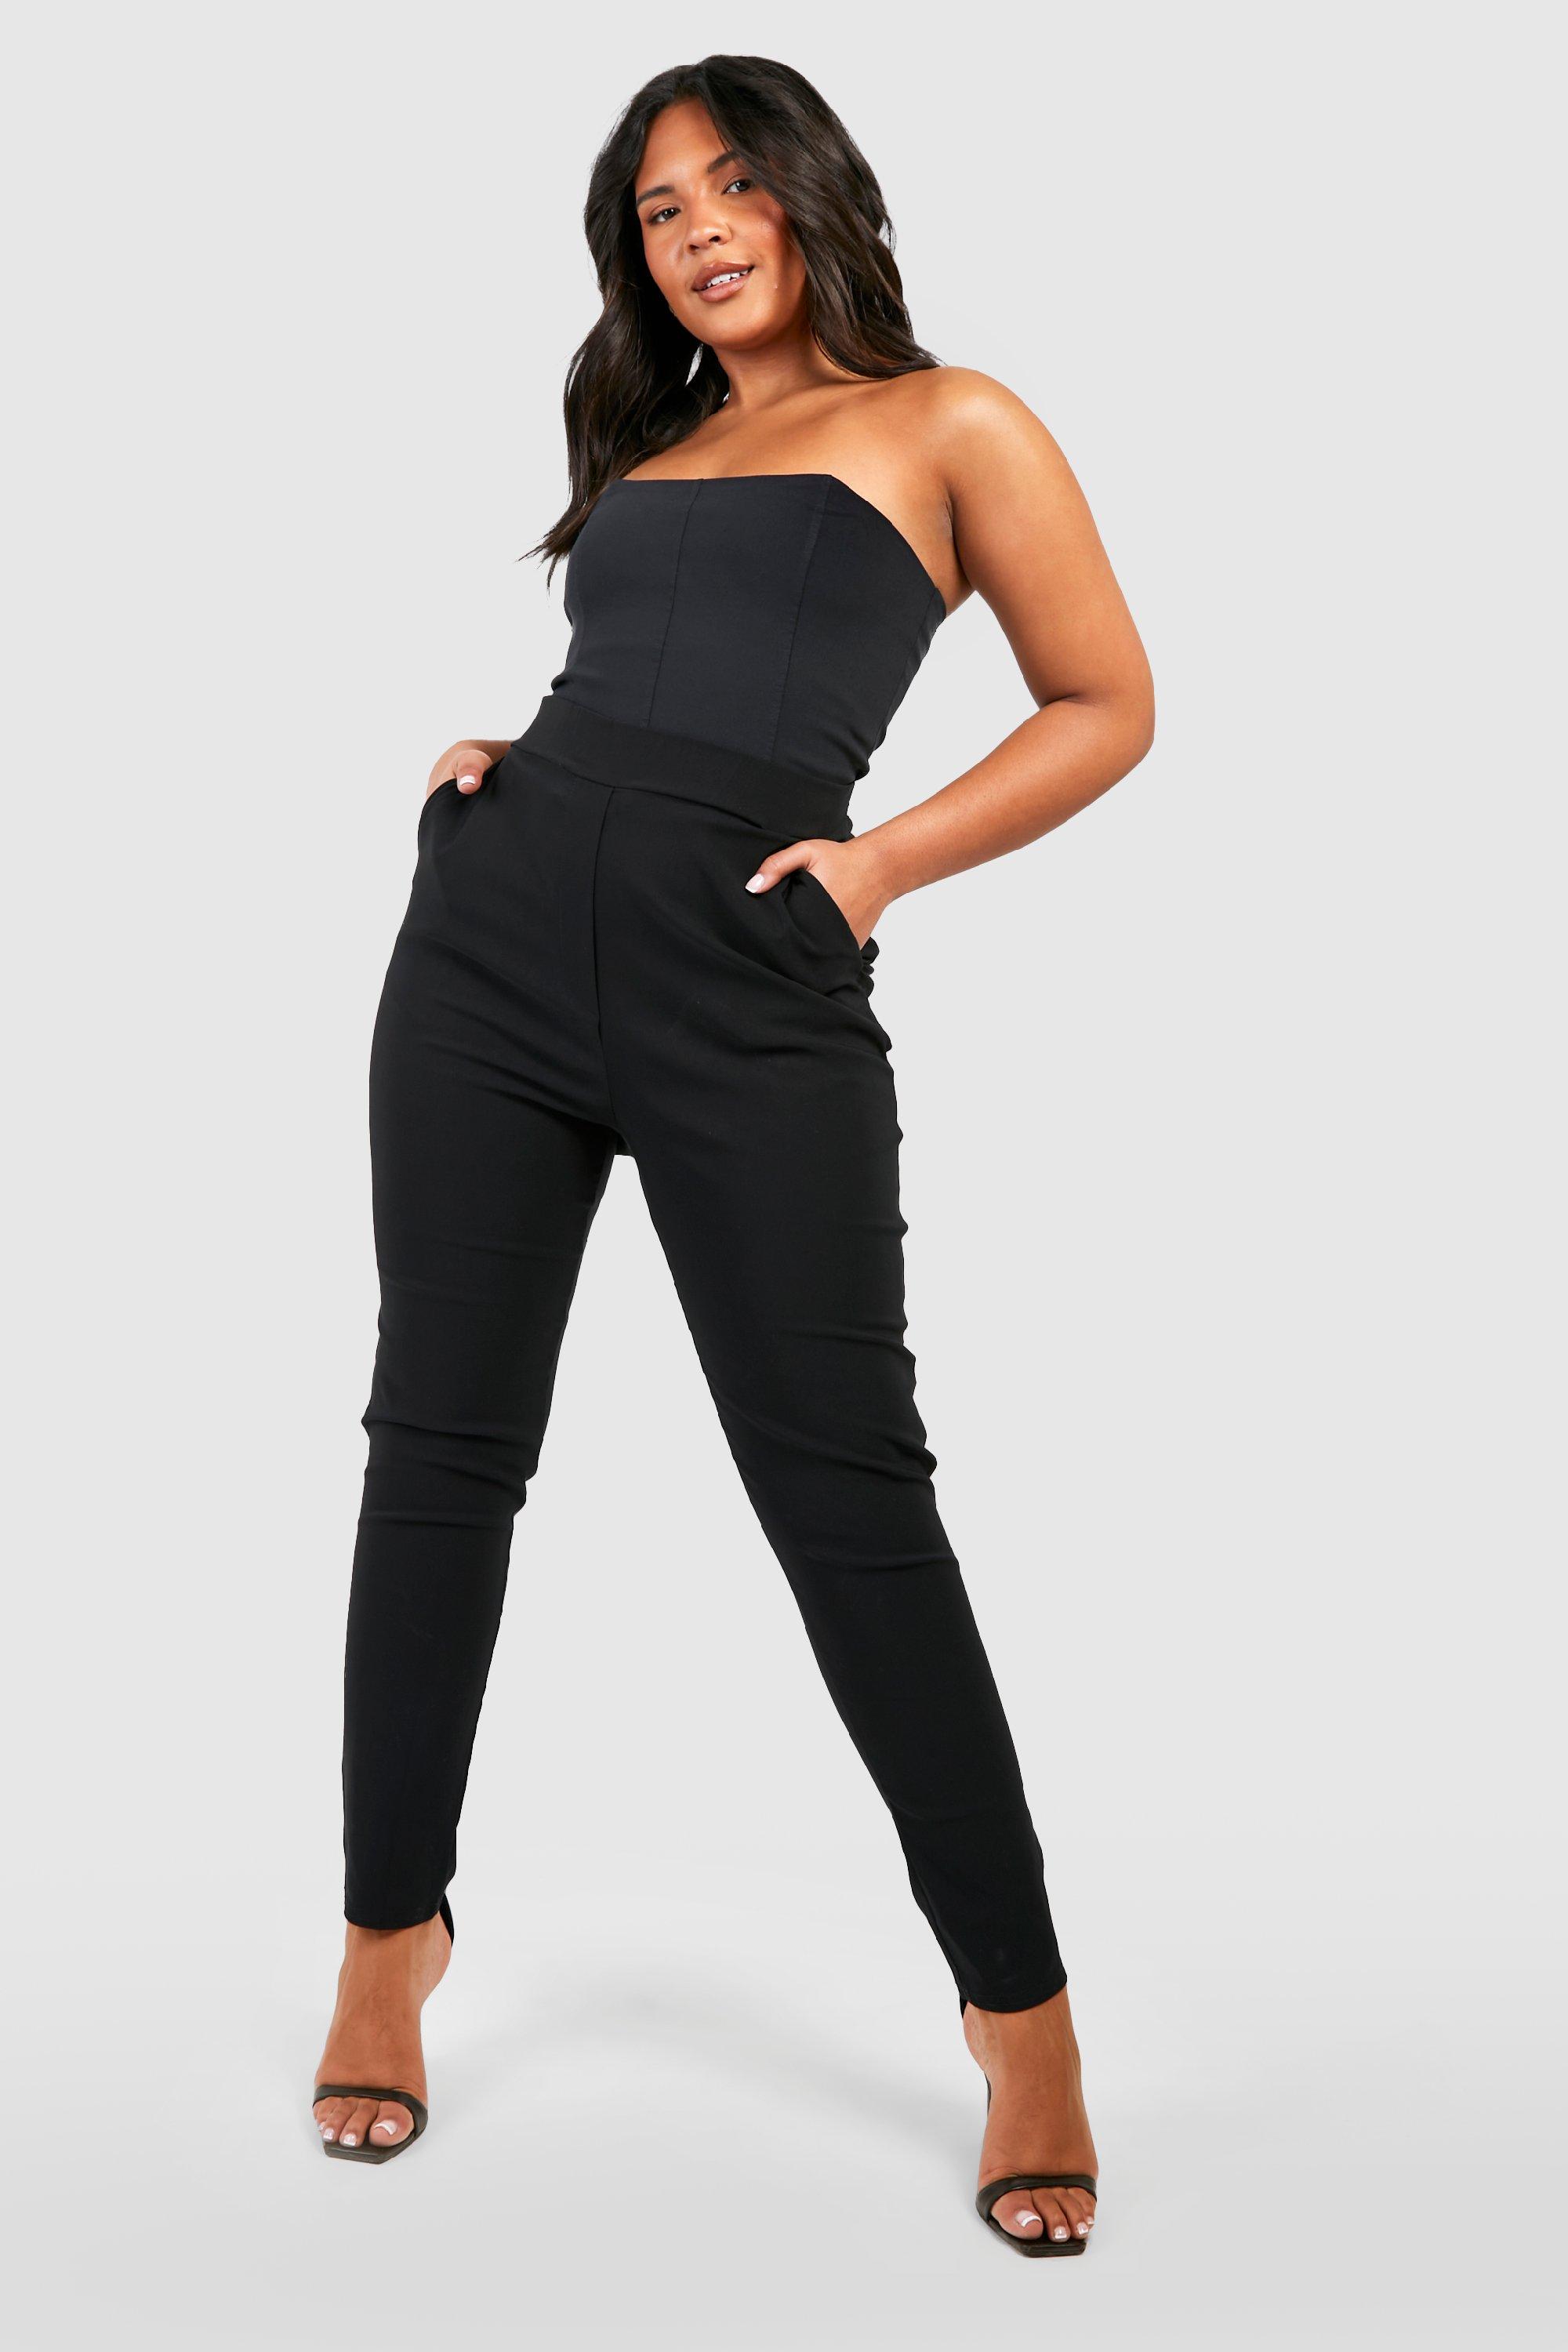 Plus Super Stretch Fitted Pants - Black - 18